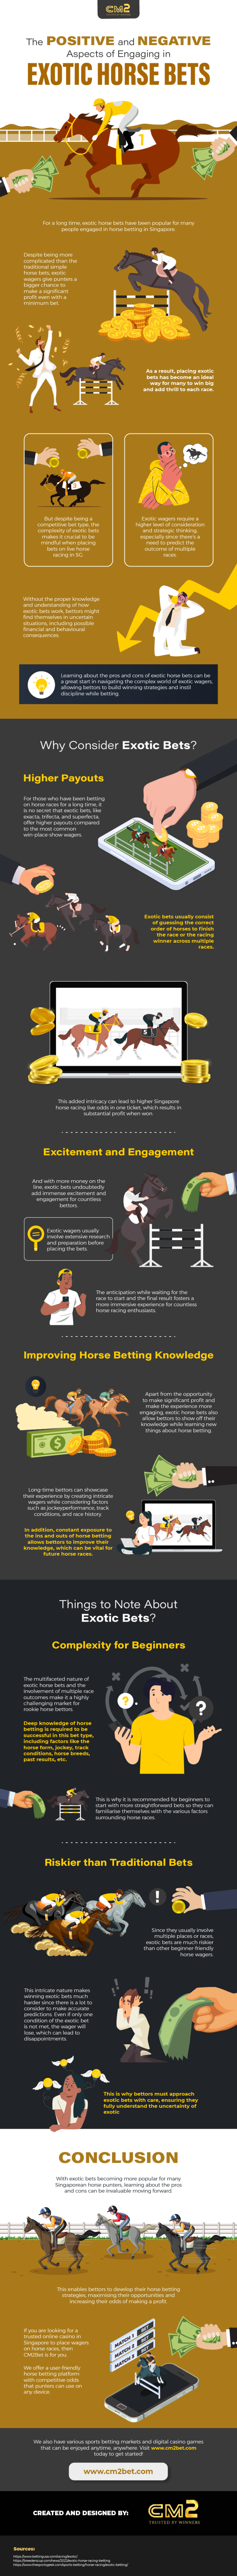 The Positive and Negative Aspects of Engaging in Exotic Horse Bets